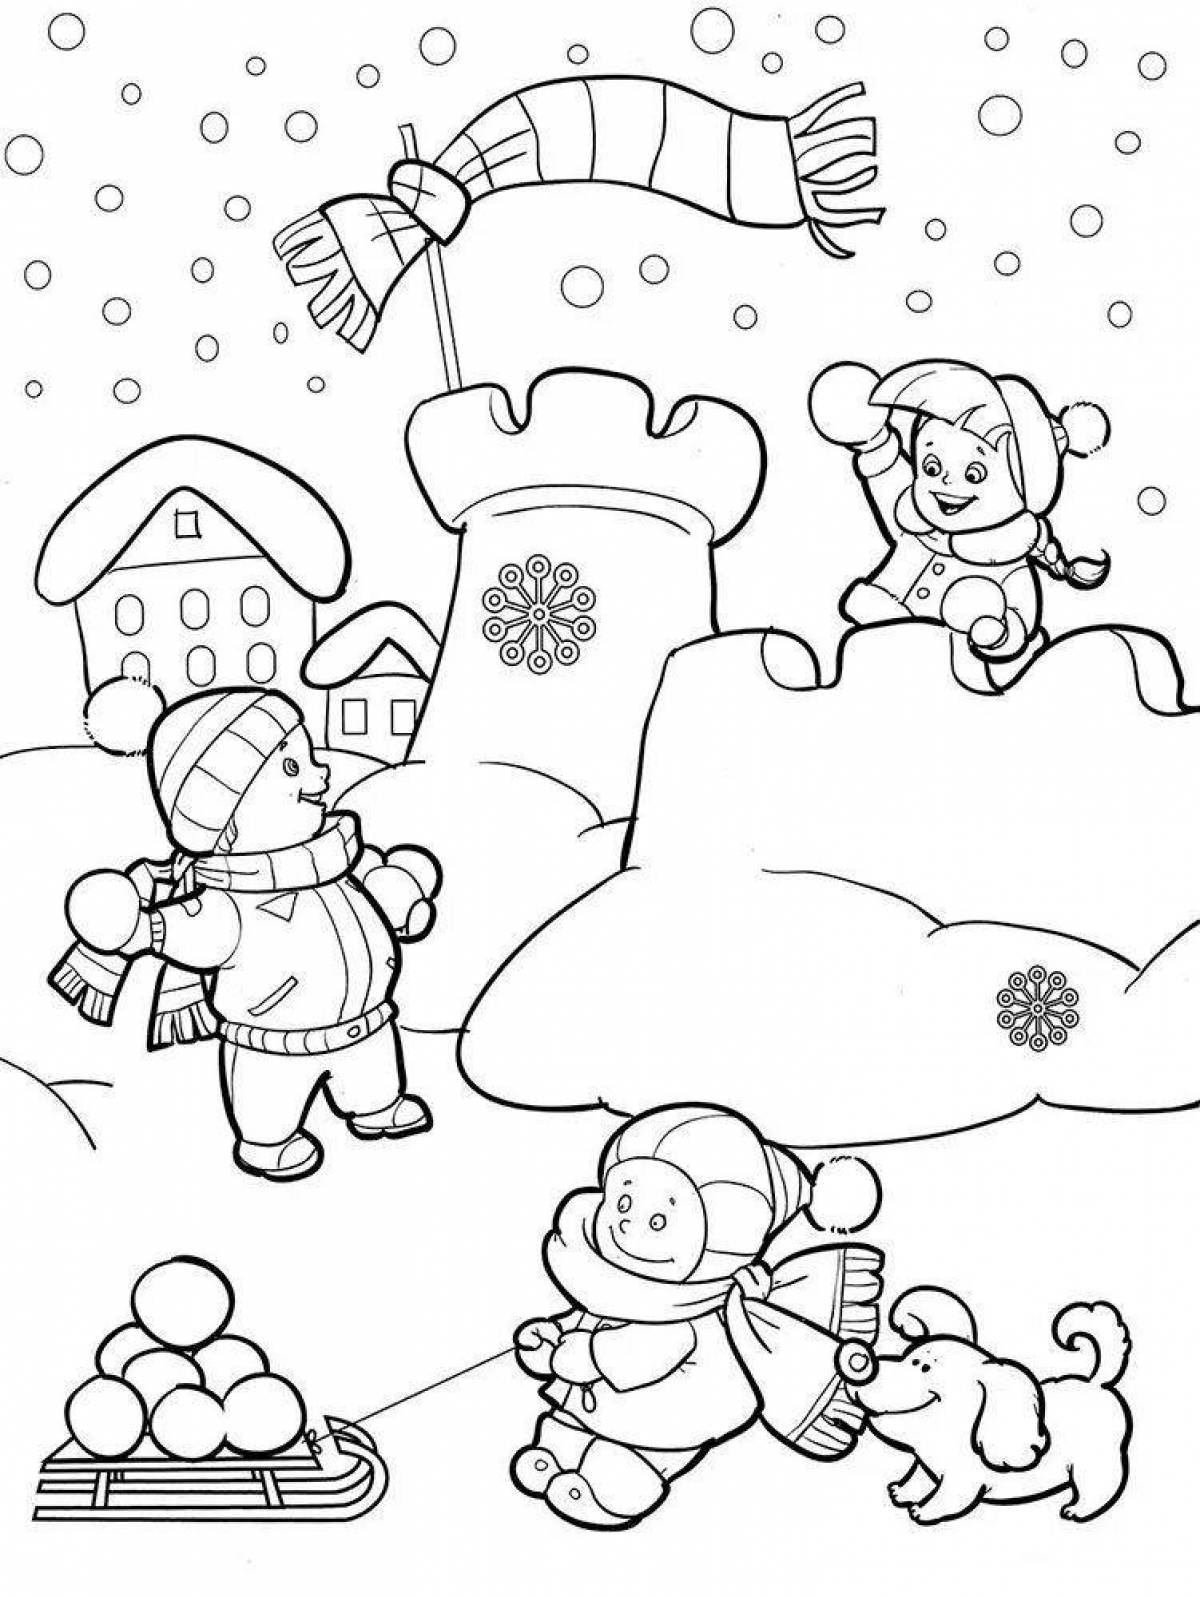 Adorable children's funny coloring book